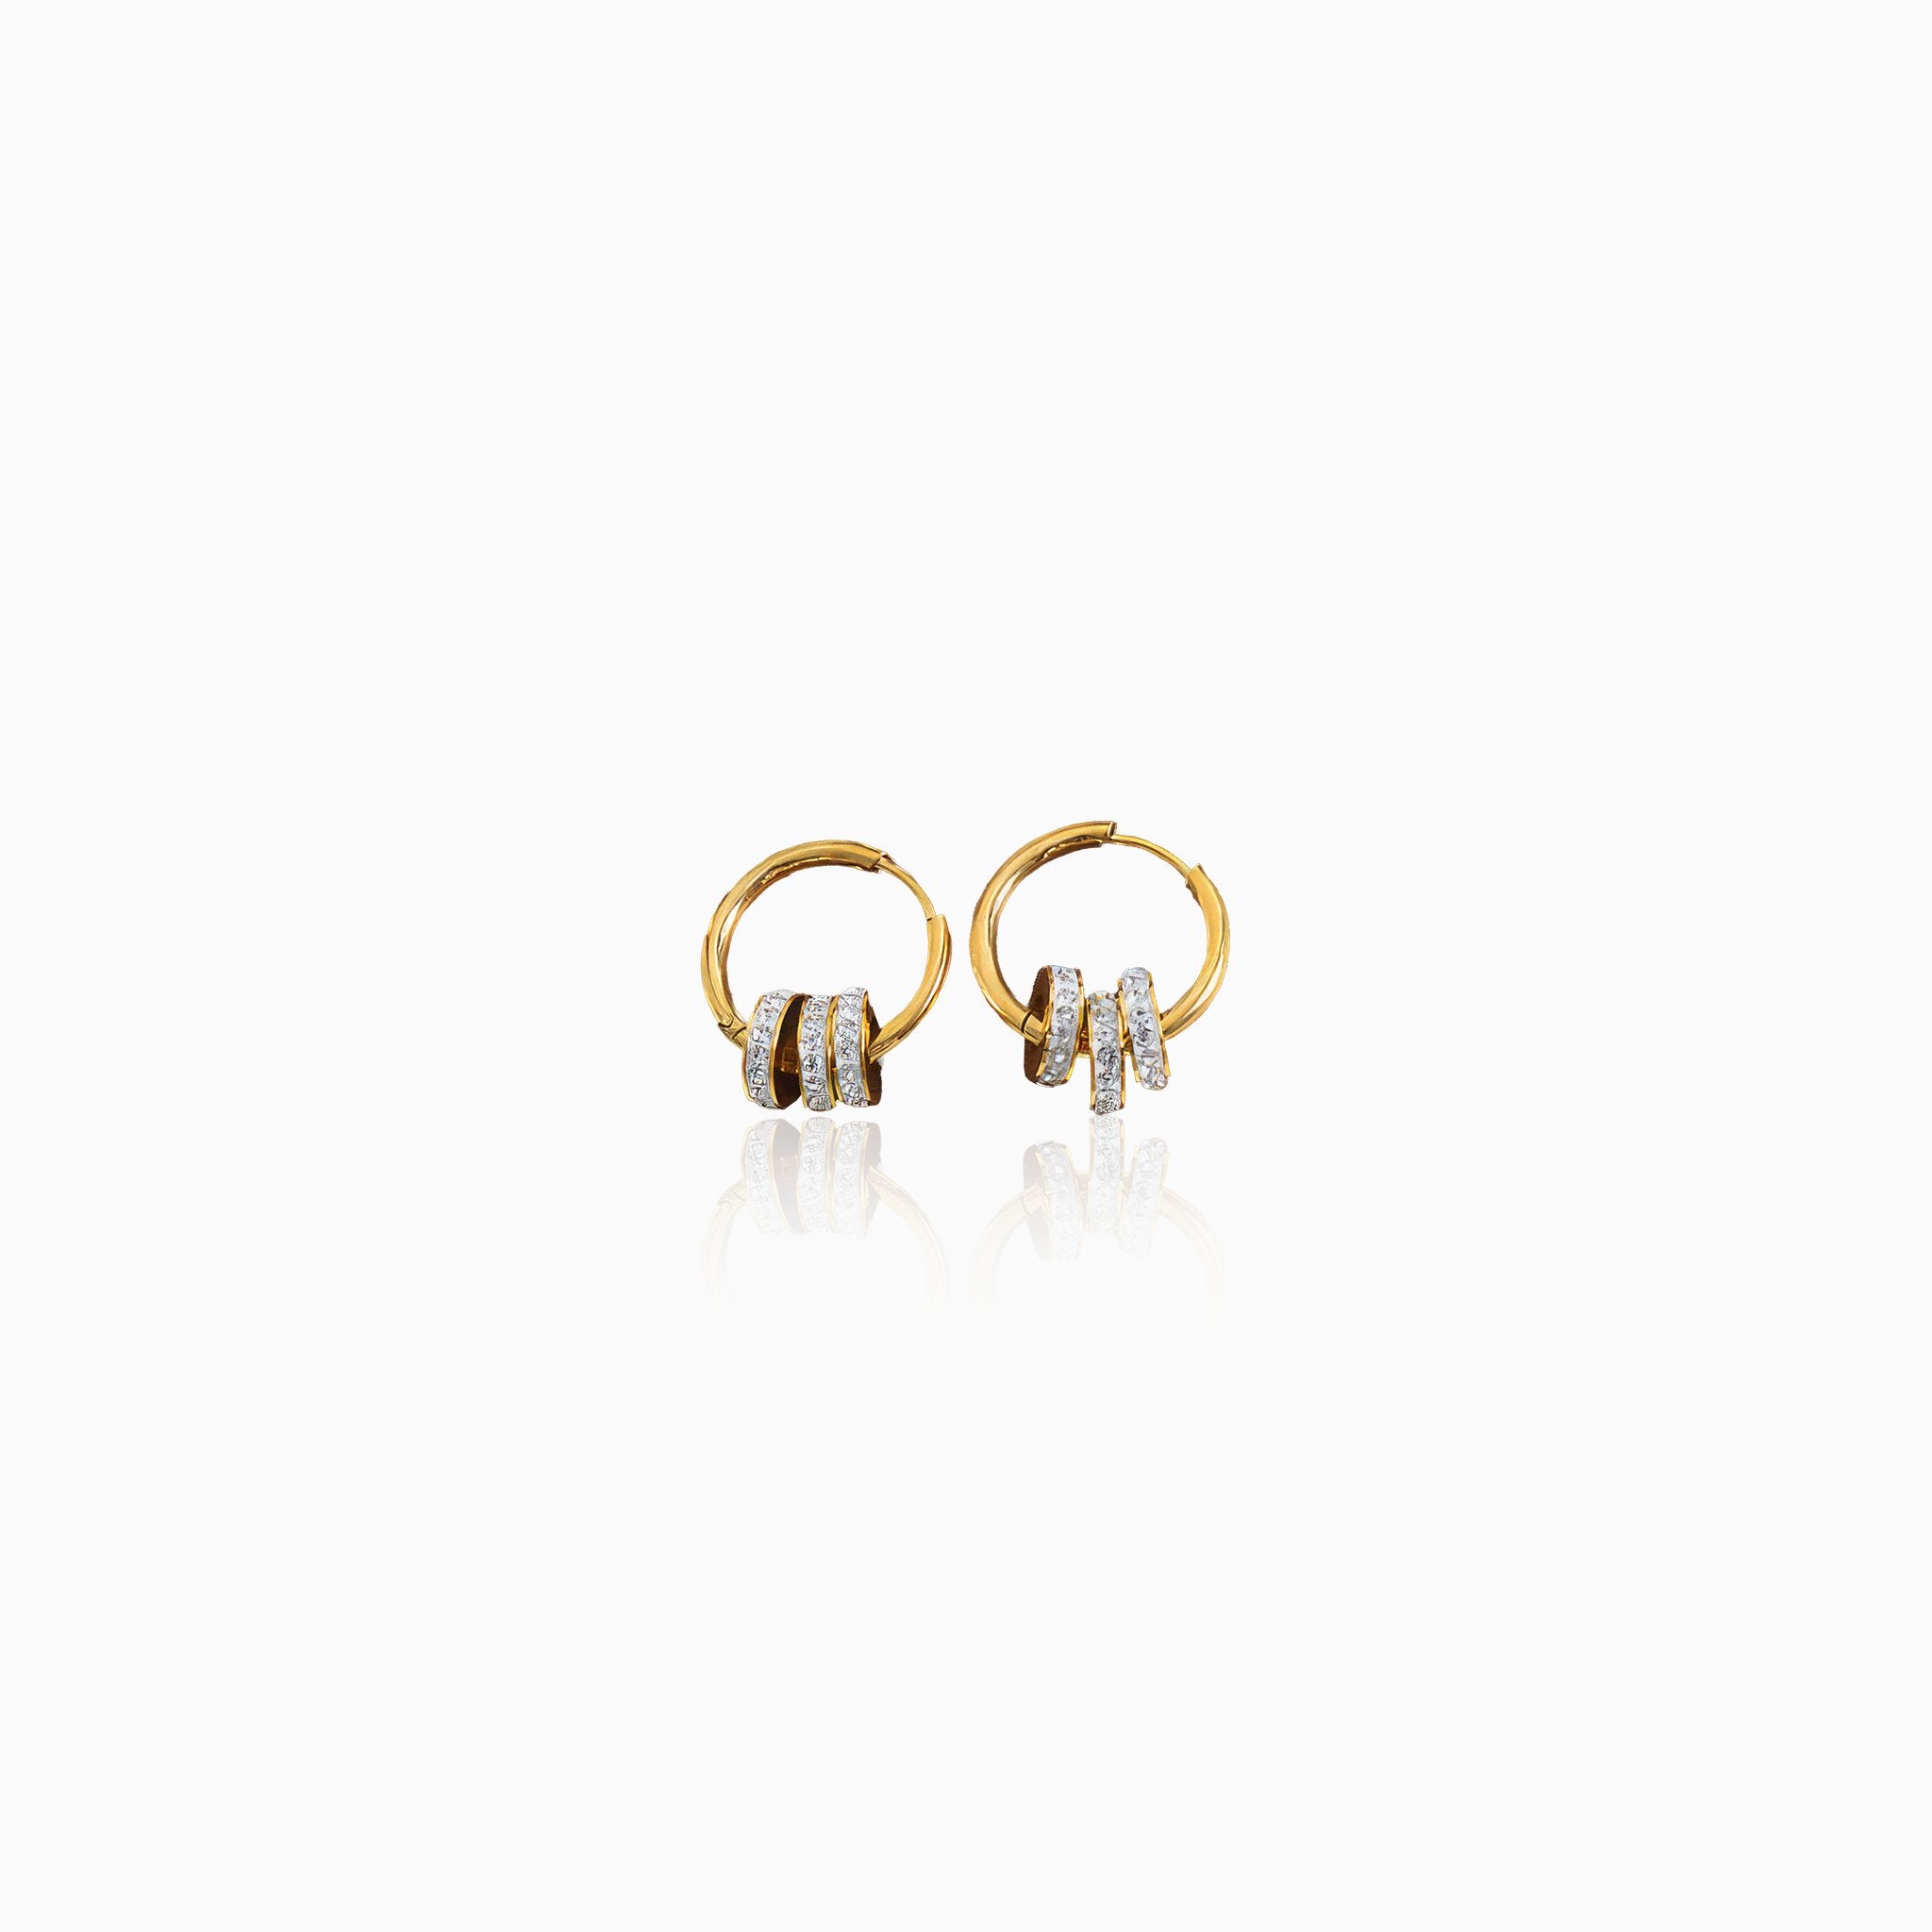 Dazzling Ring Earrings with Diamond-Studded Circles - Nobbier - Earrings - 18K Gold And Titanium PVD Coated Jewelry